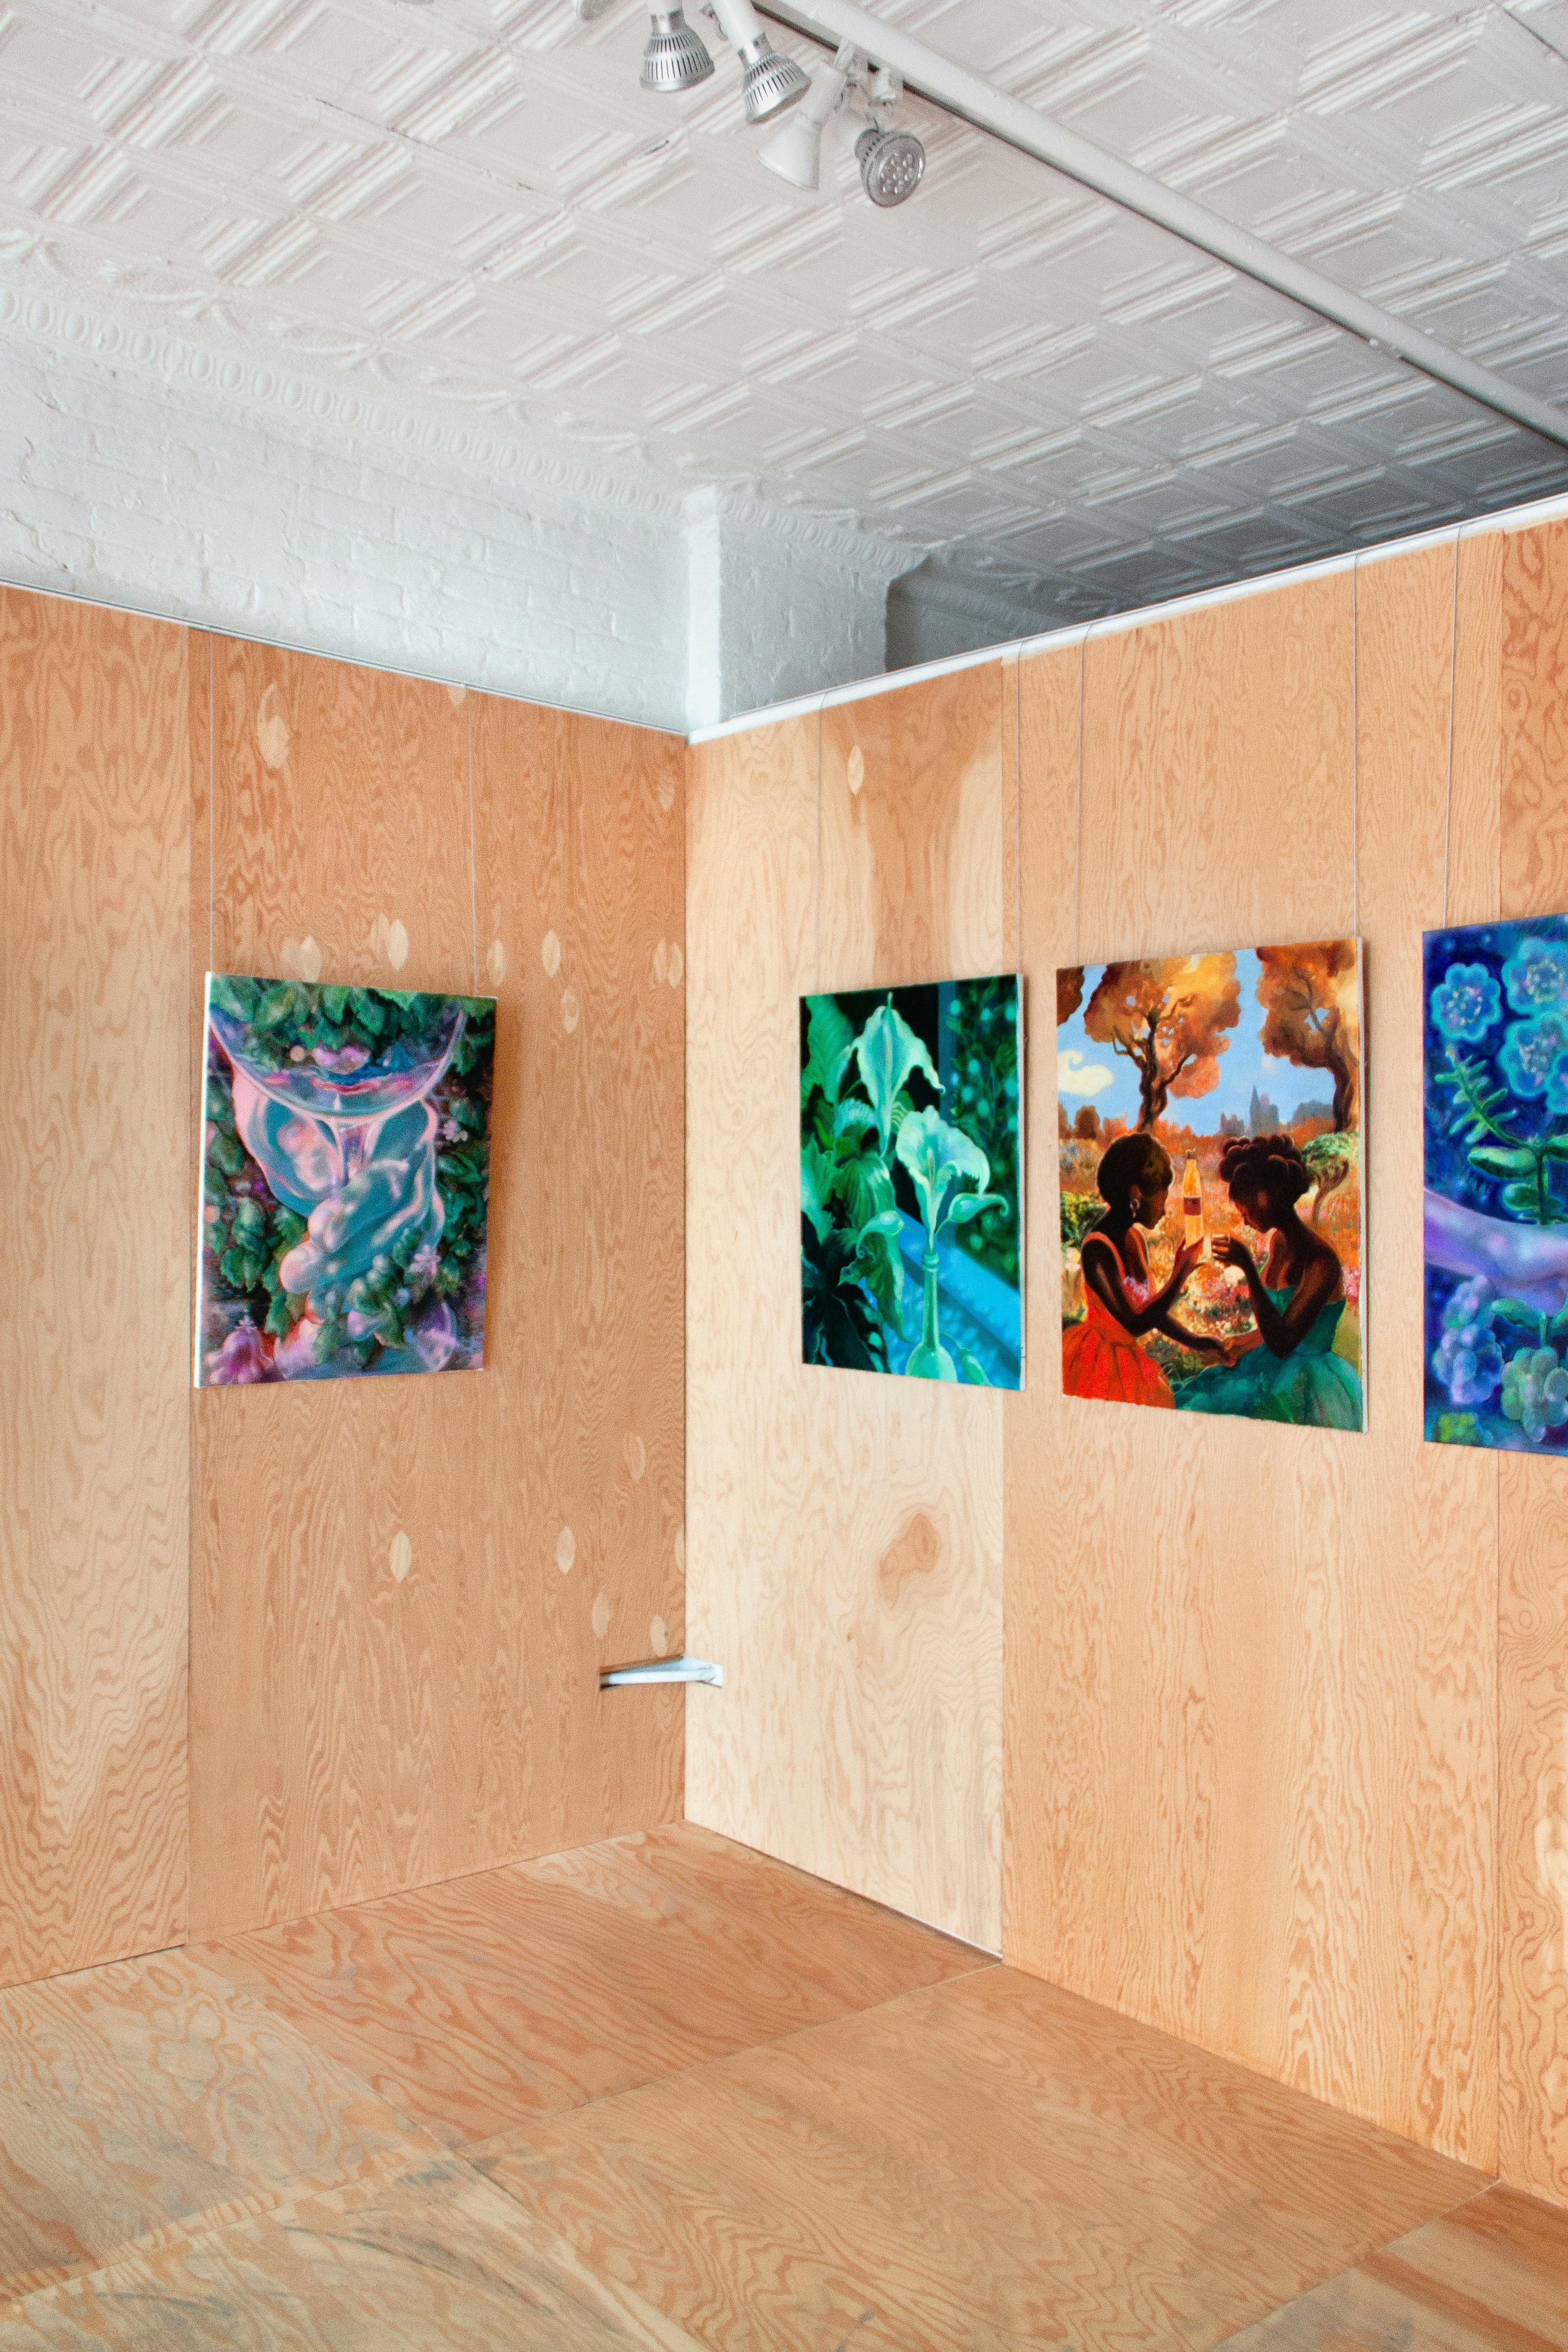 Paintings by Nefertiti Jenkins installed at Uprise Art for exhibition Ghosts in the Garden.